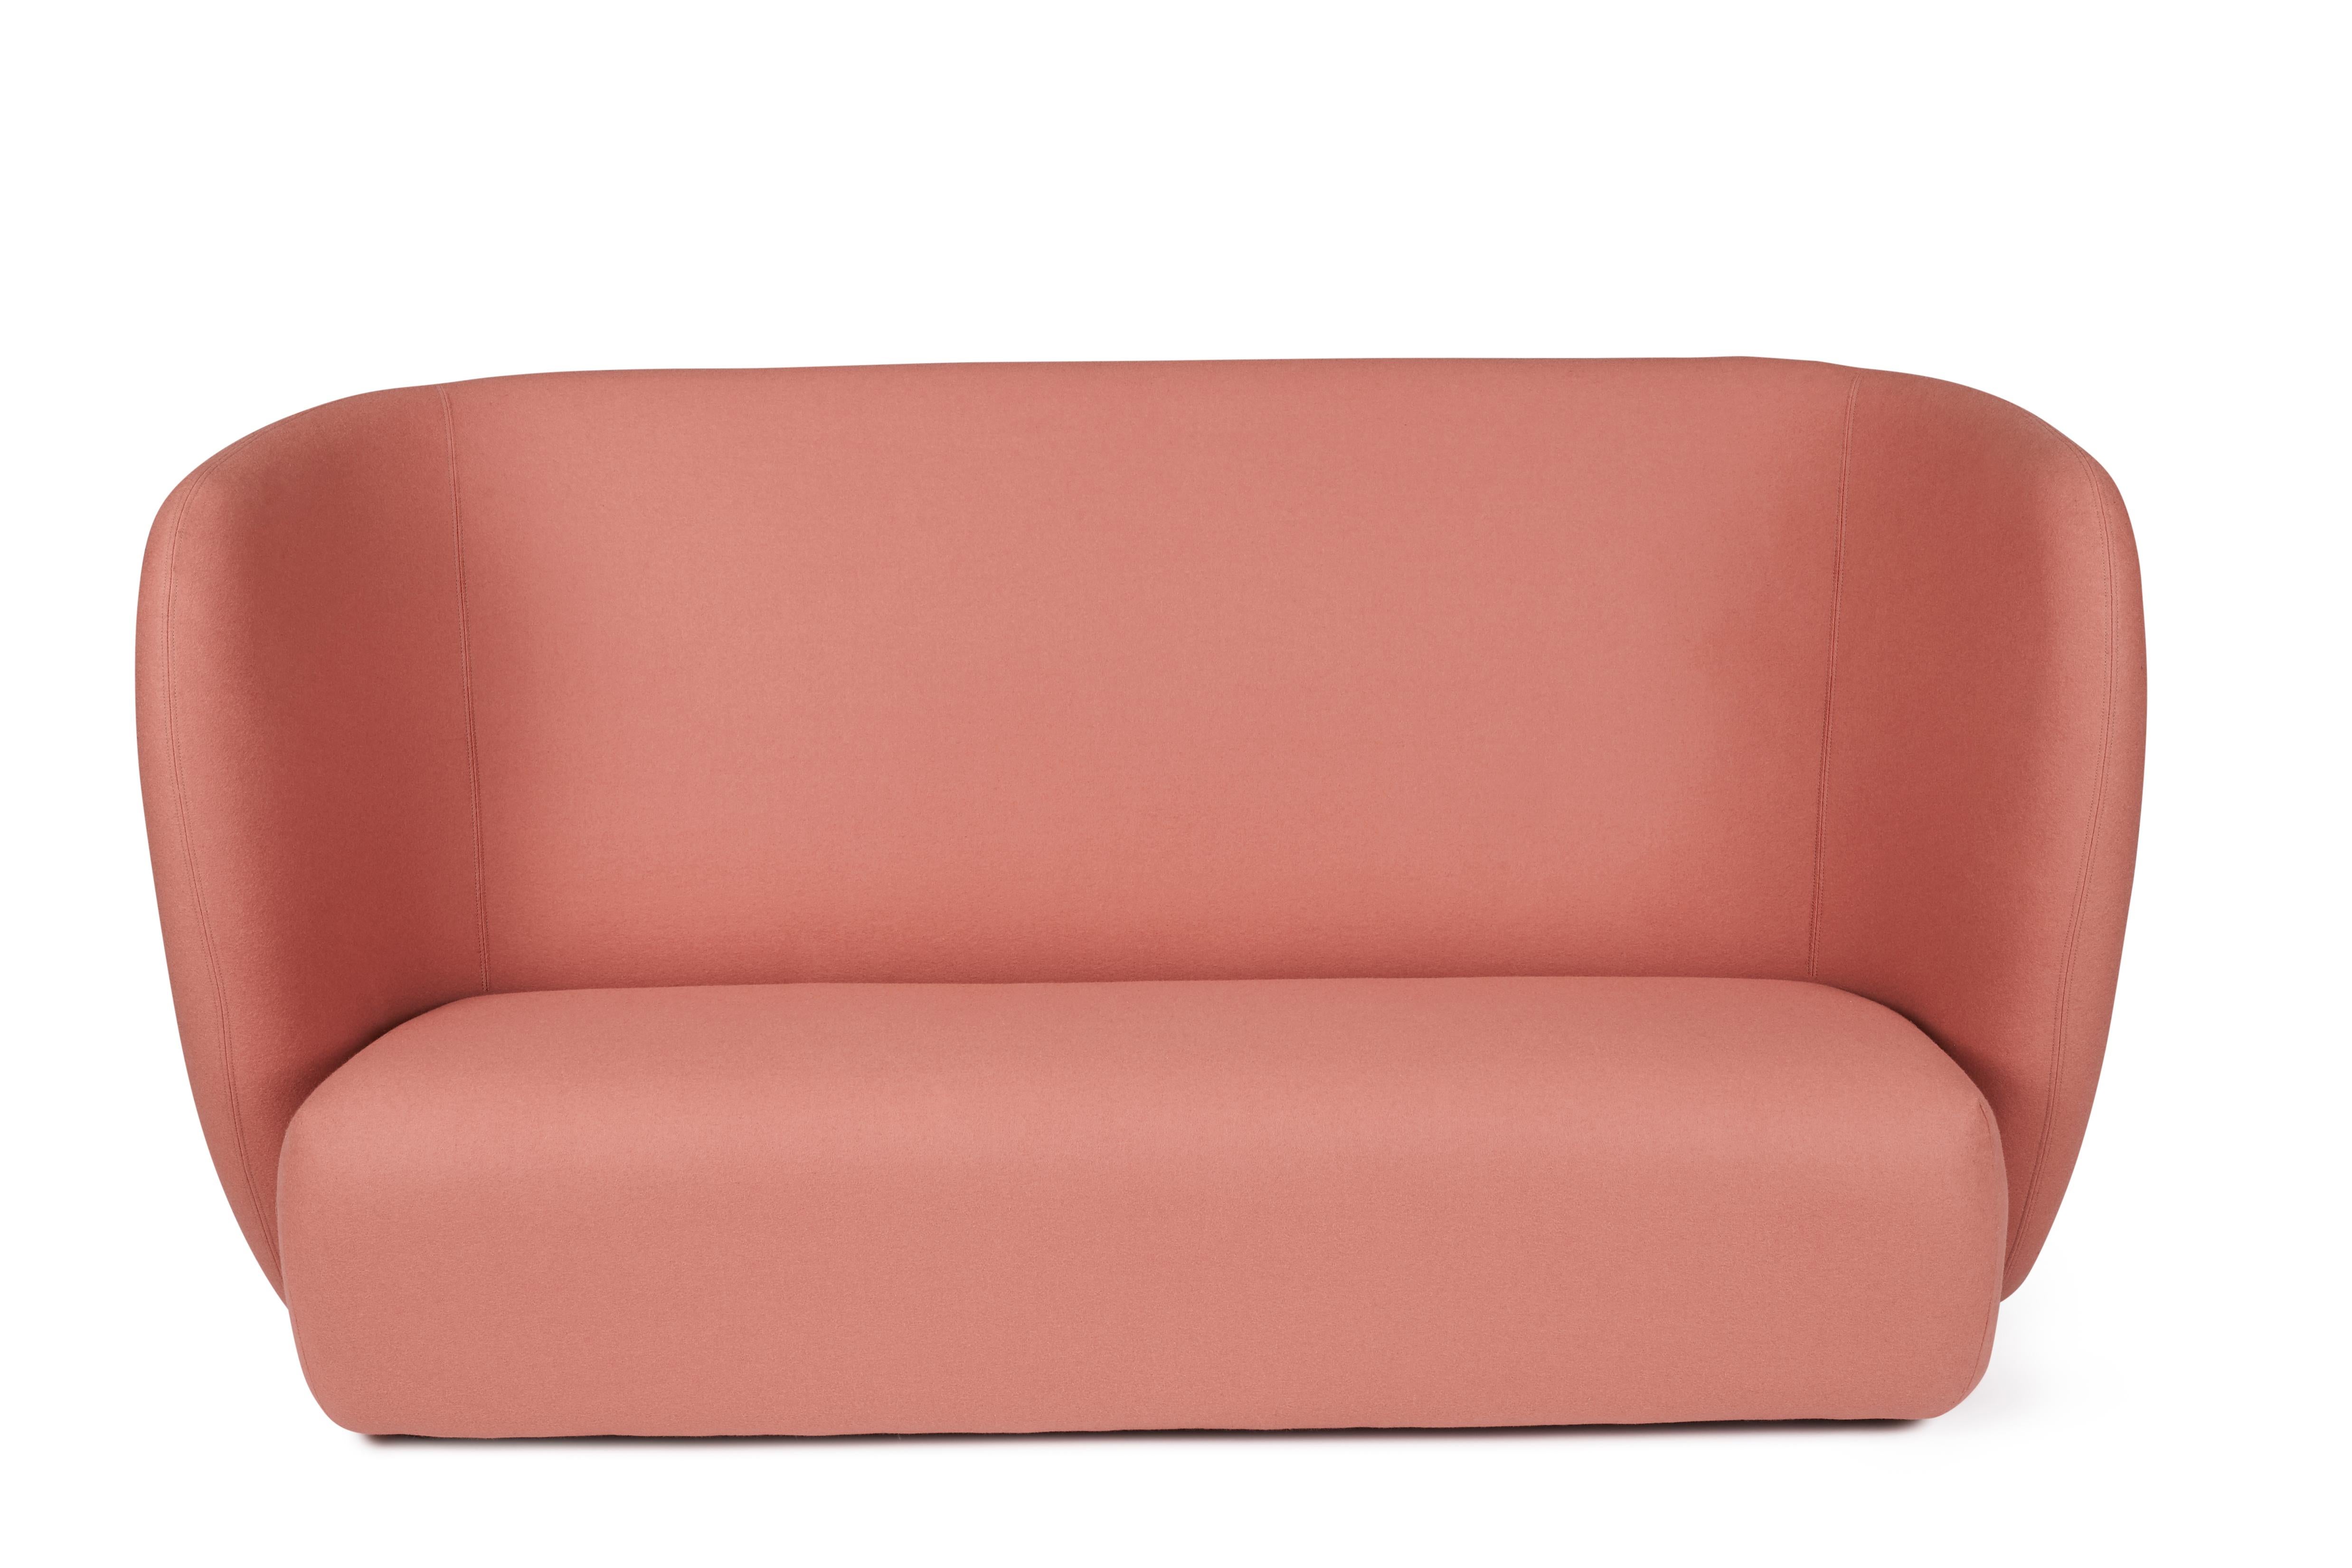 For Sale: Pink (Hero 511) Haven 3-Seat Sofa, by Charlotte Høncke from Warm Nordic